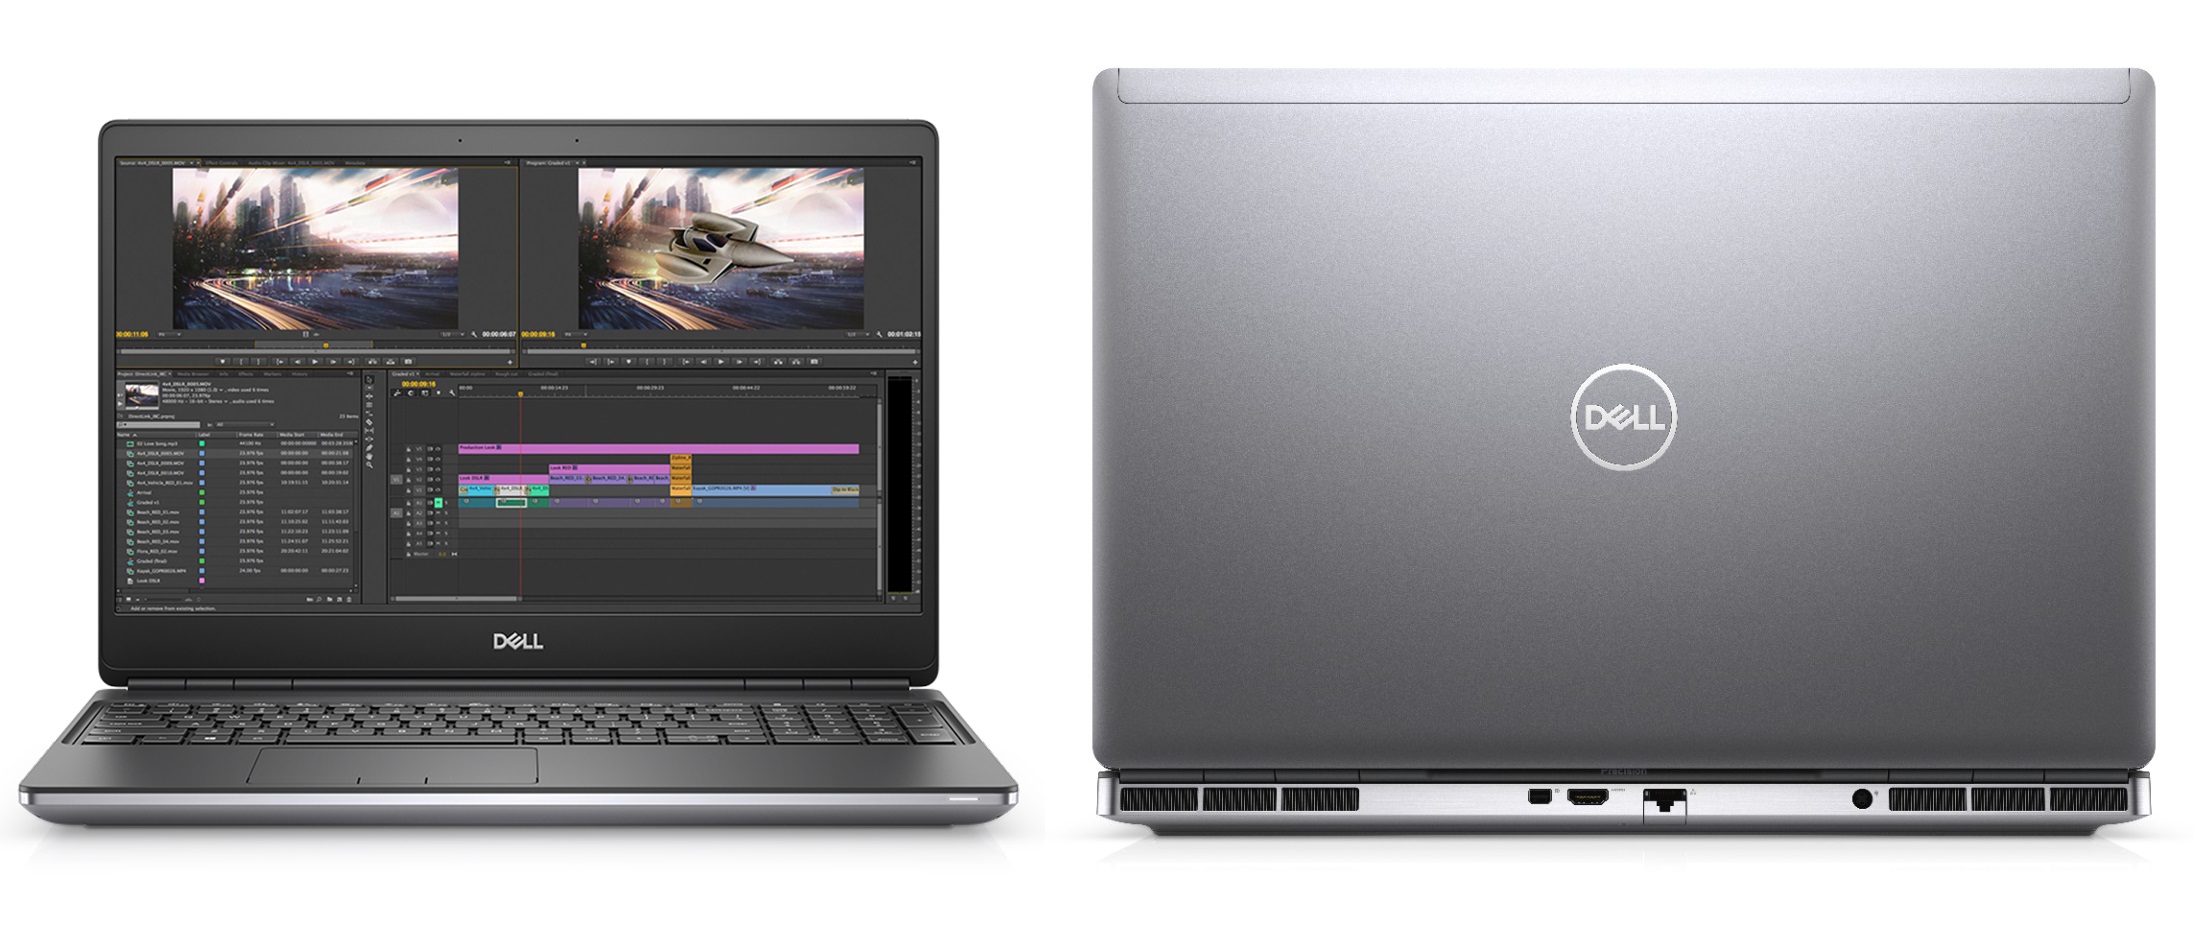 Dell Precision Laptops - New Mobile Workstations Announced | CineD